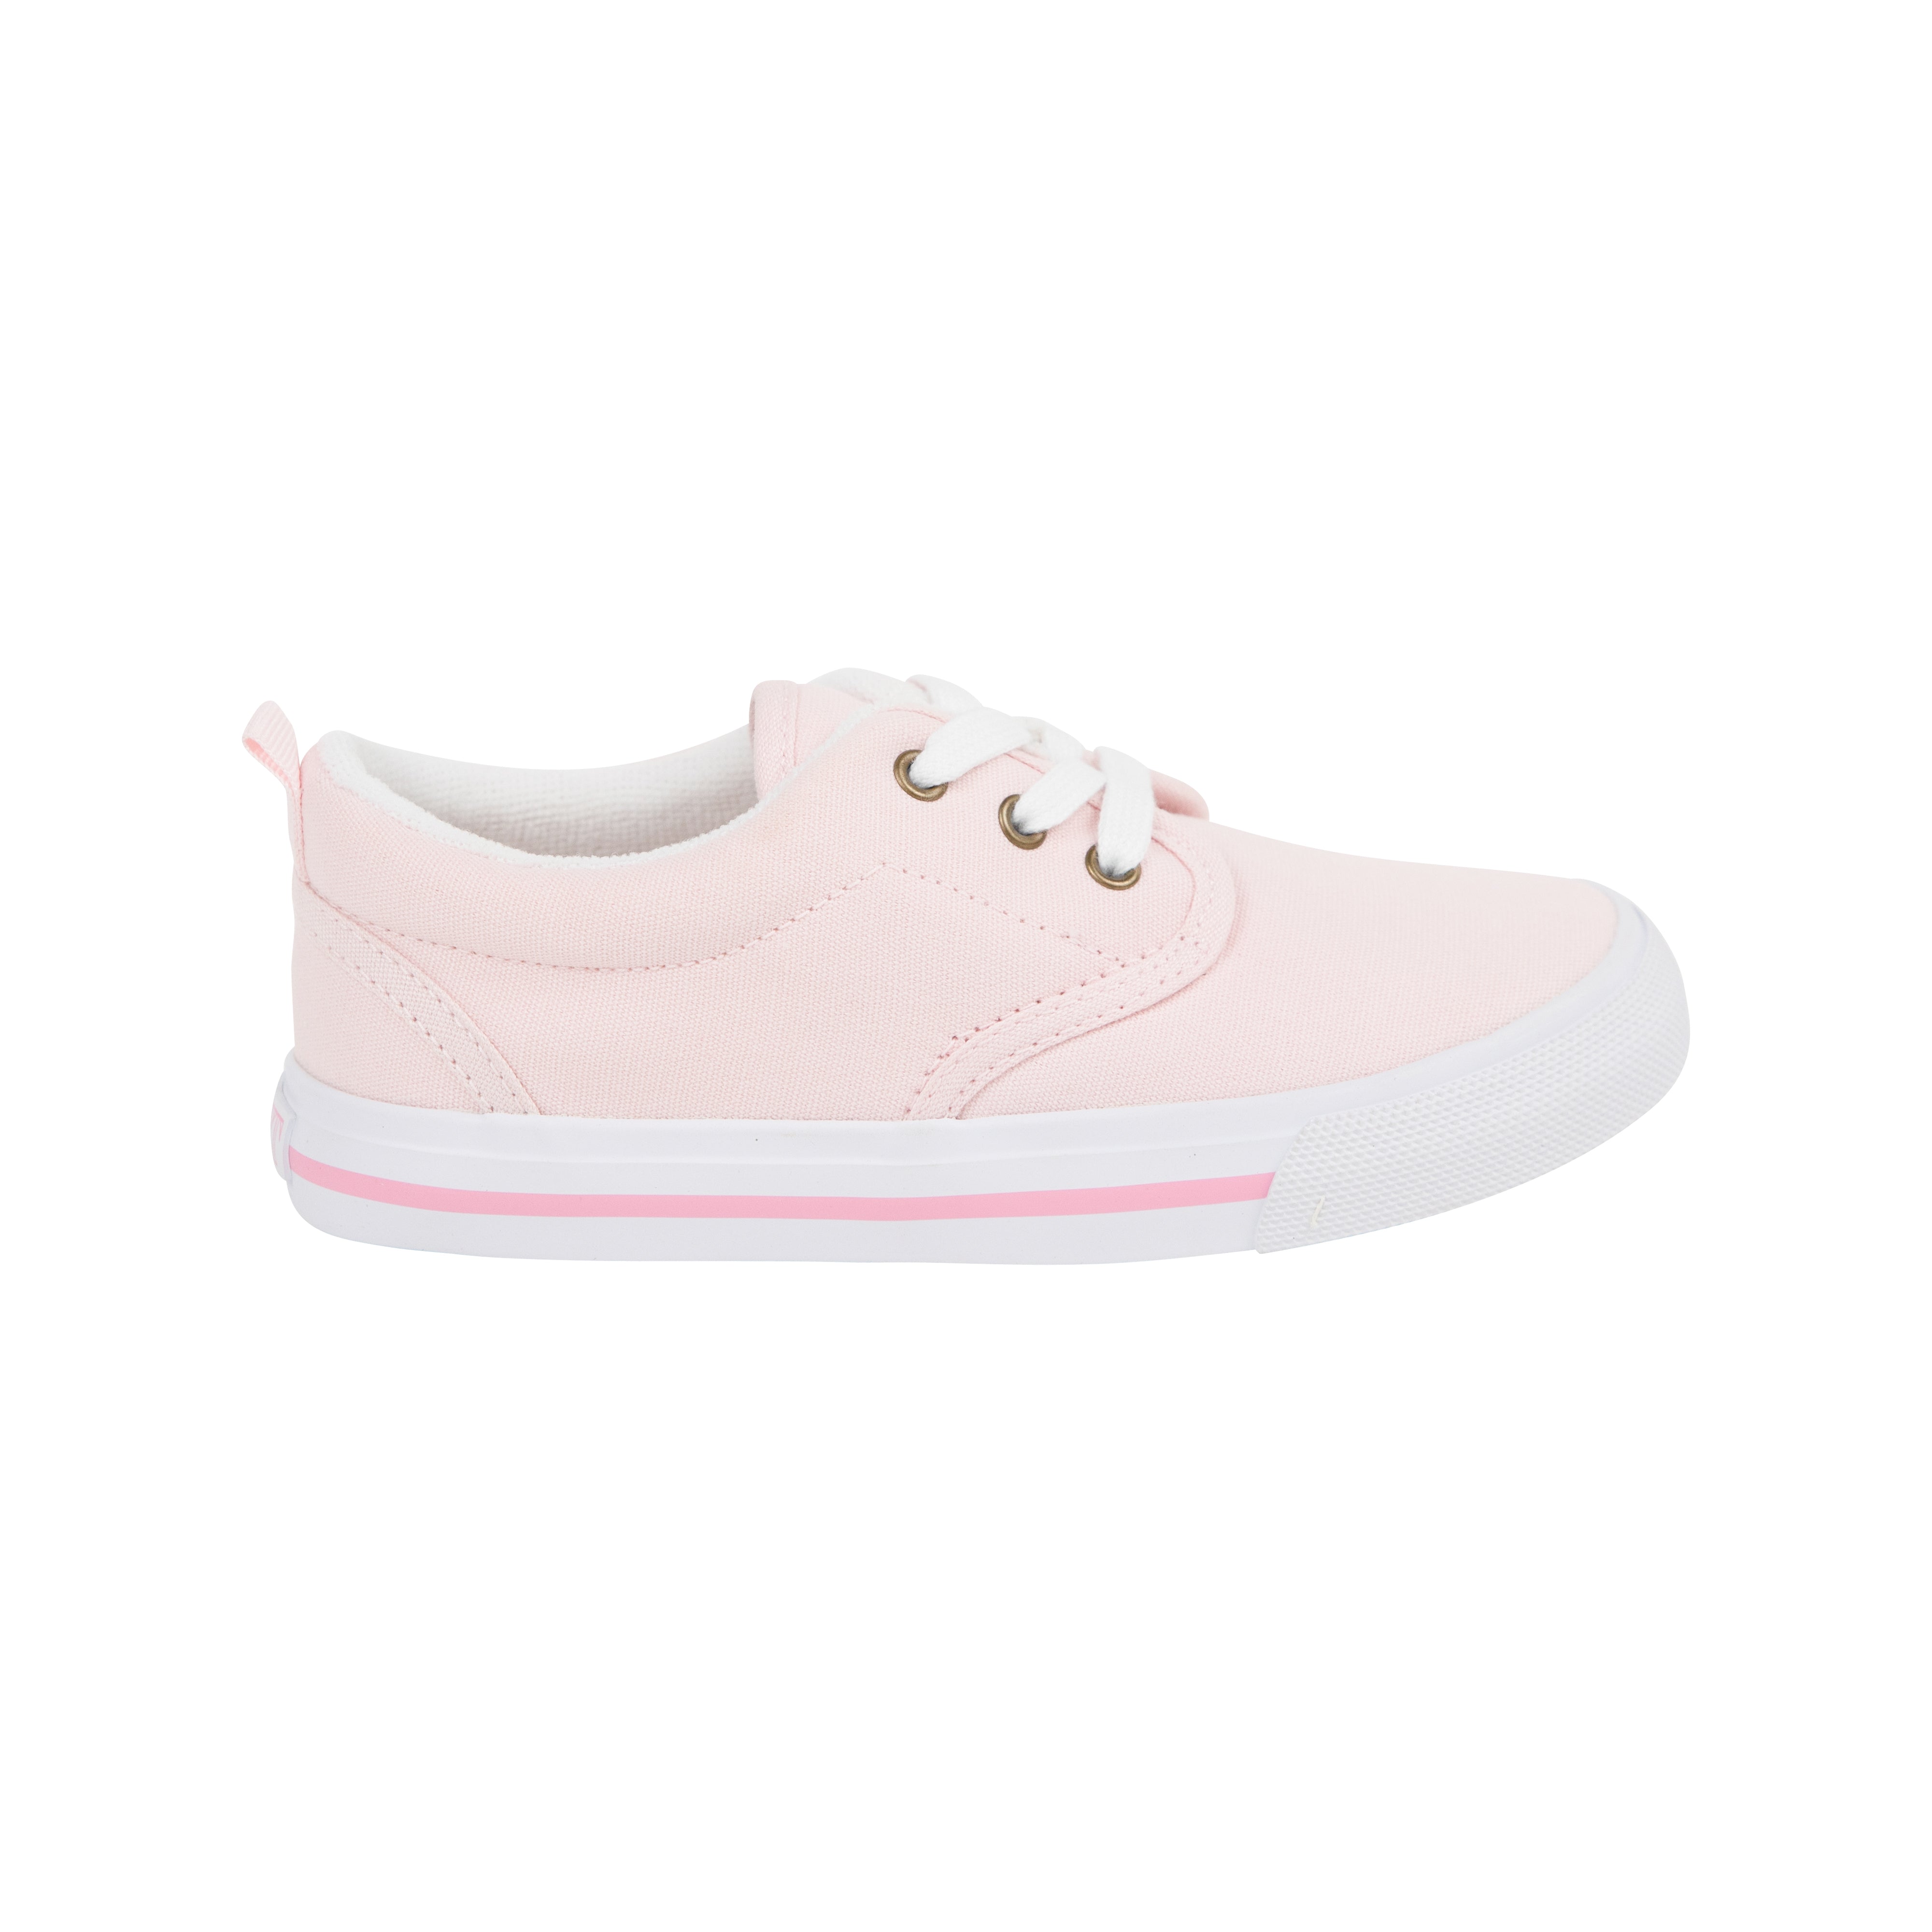 Prep Step Sneakers - Palm Beach Pink with Palm Beach Pink Stripe – The ...